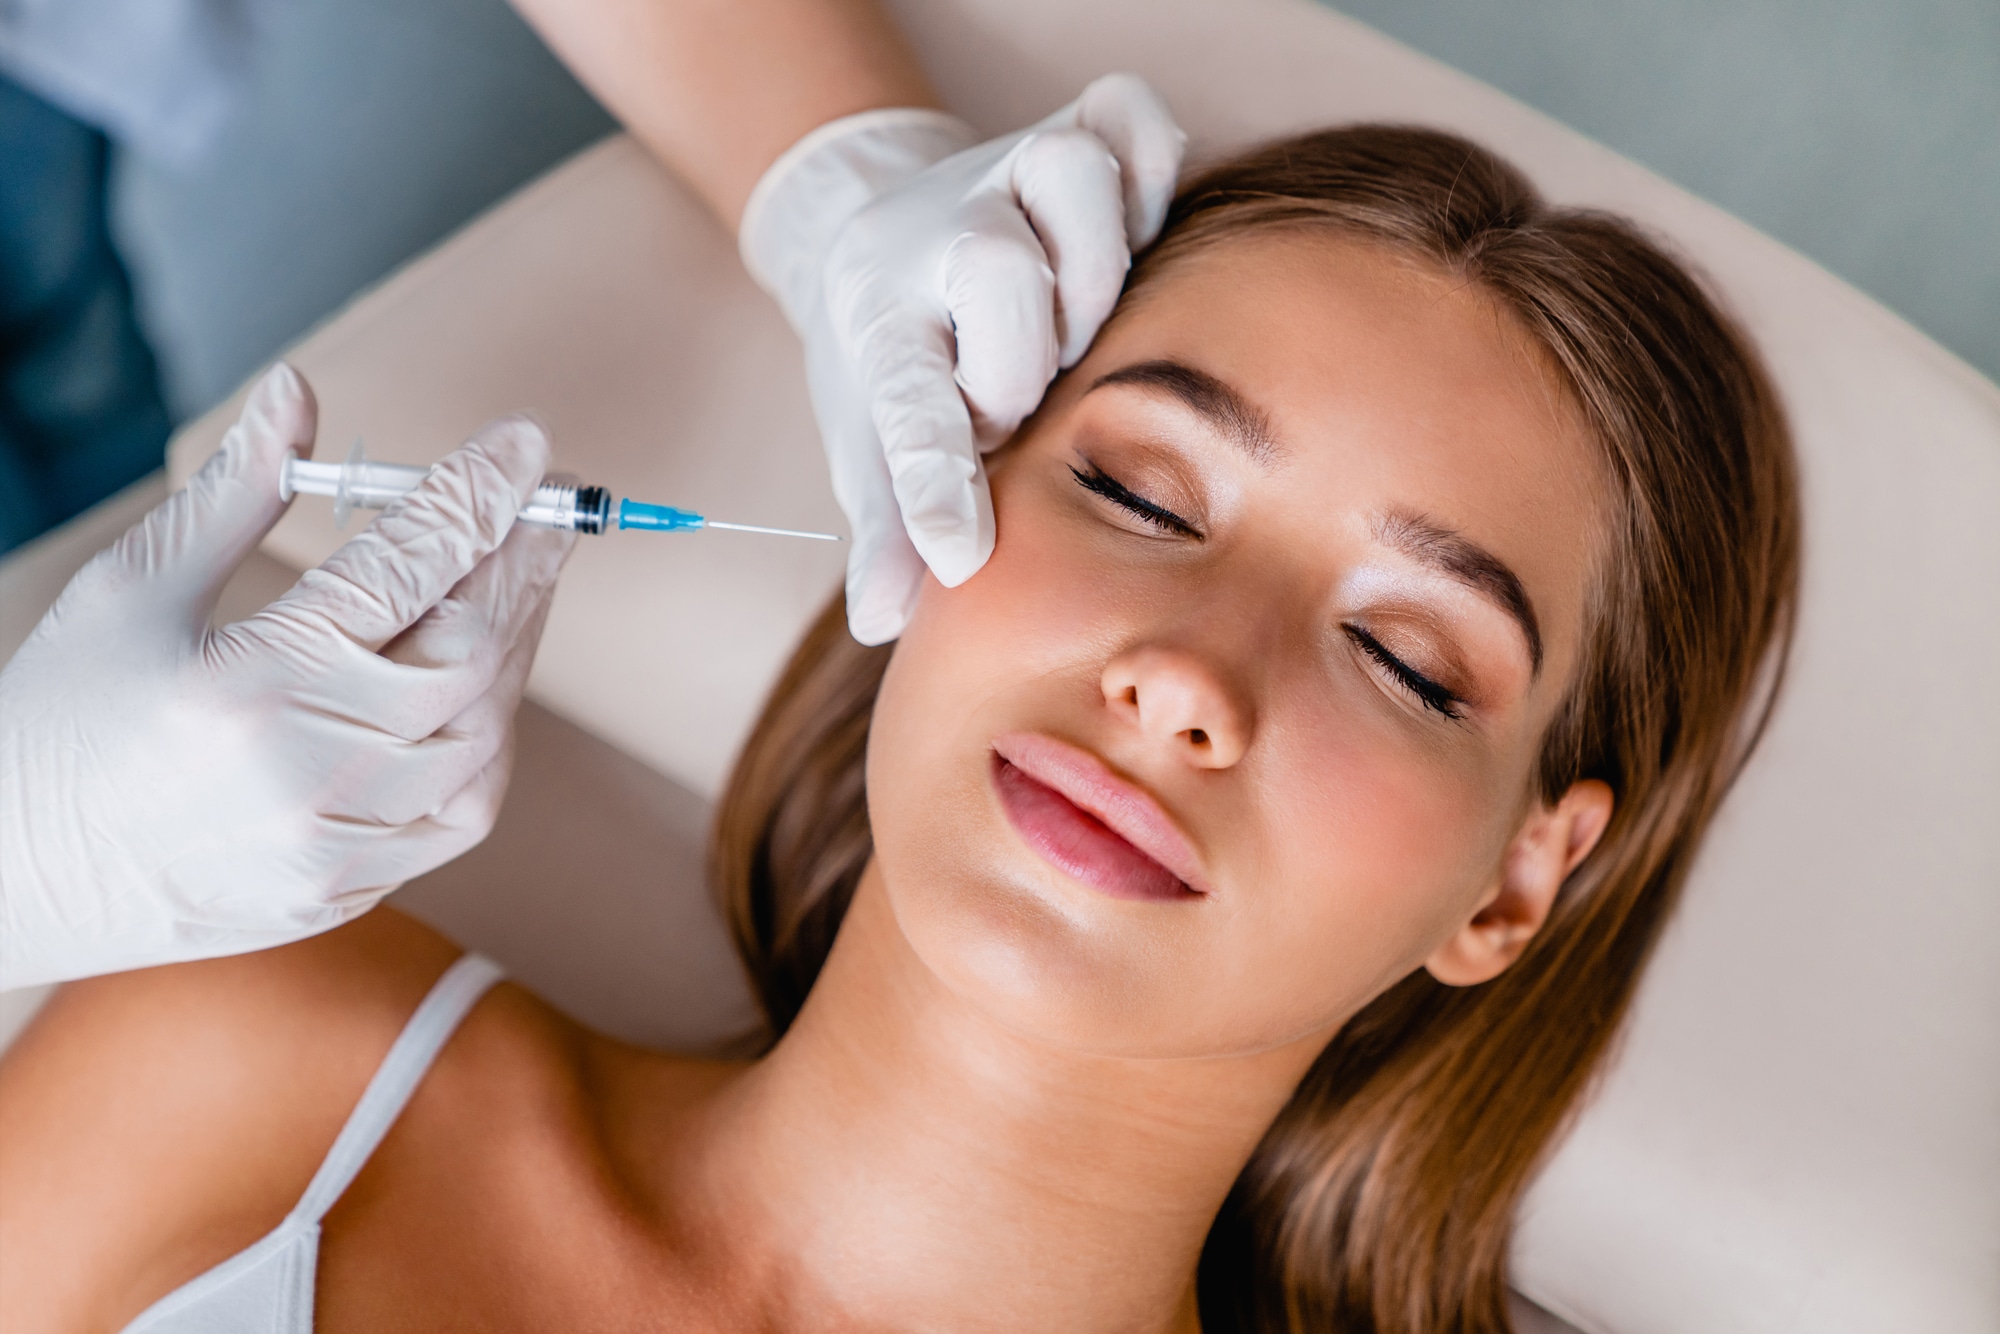 Young woman gets Botox facial injections in salon